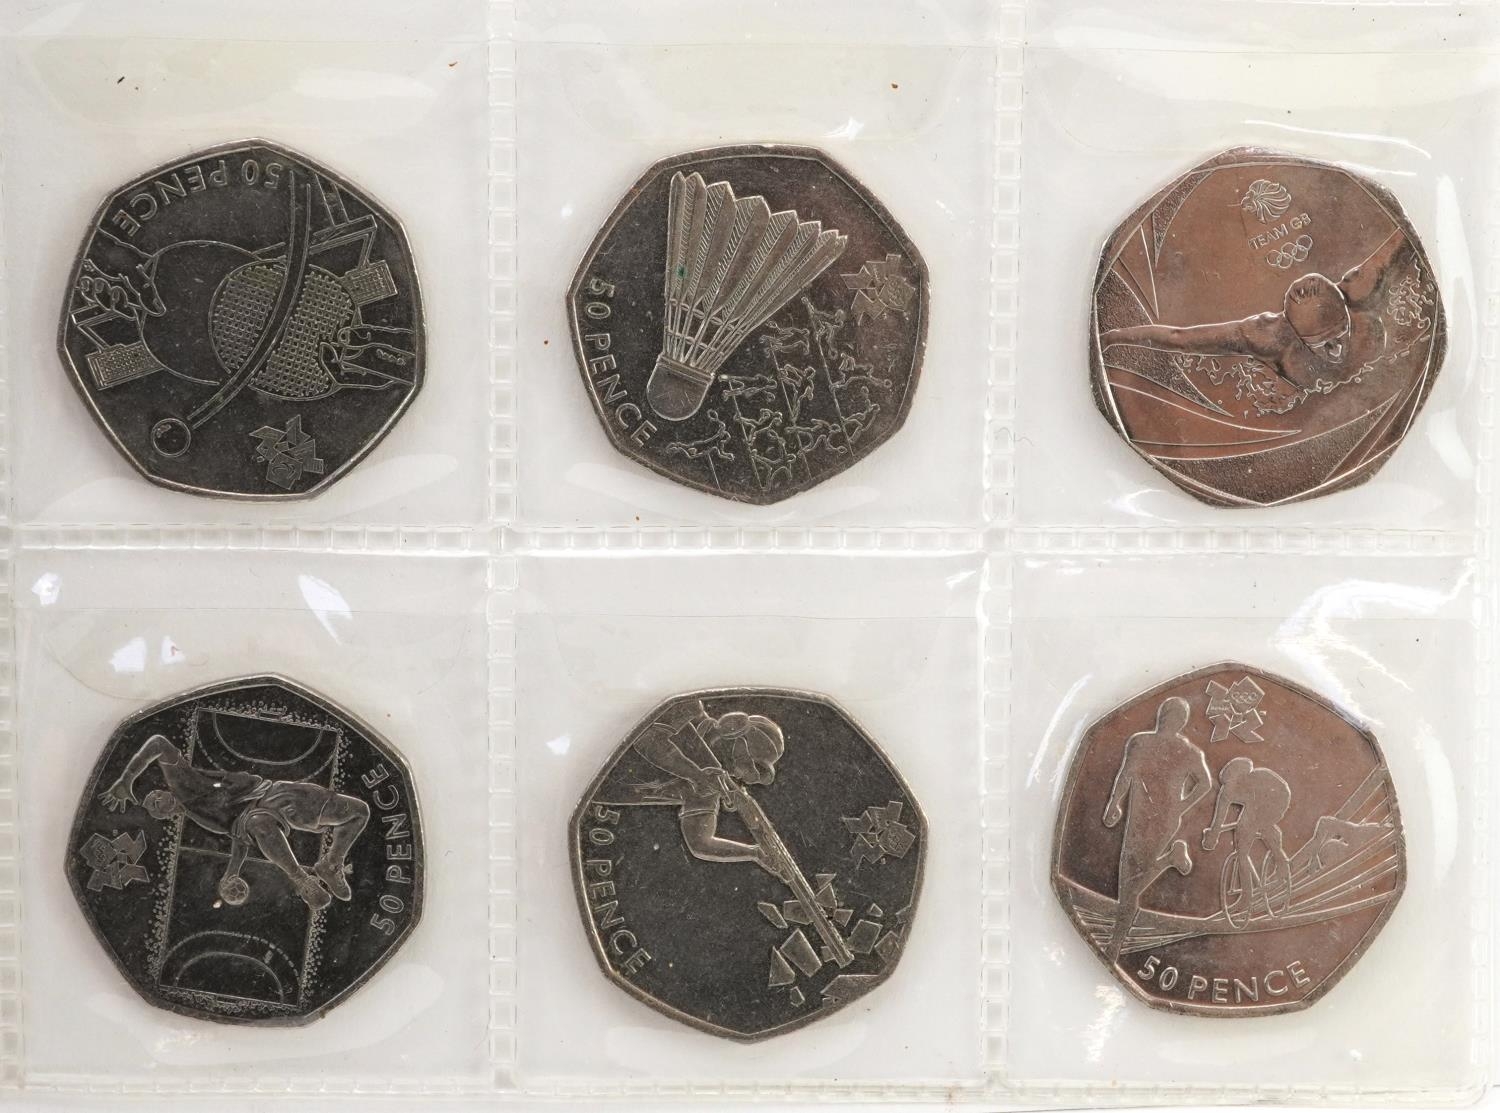 Set of thirty Elizabeth II 2011 London 2012 Olympics fifty pence pieces arranged in a coin - Image 5 of 6